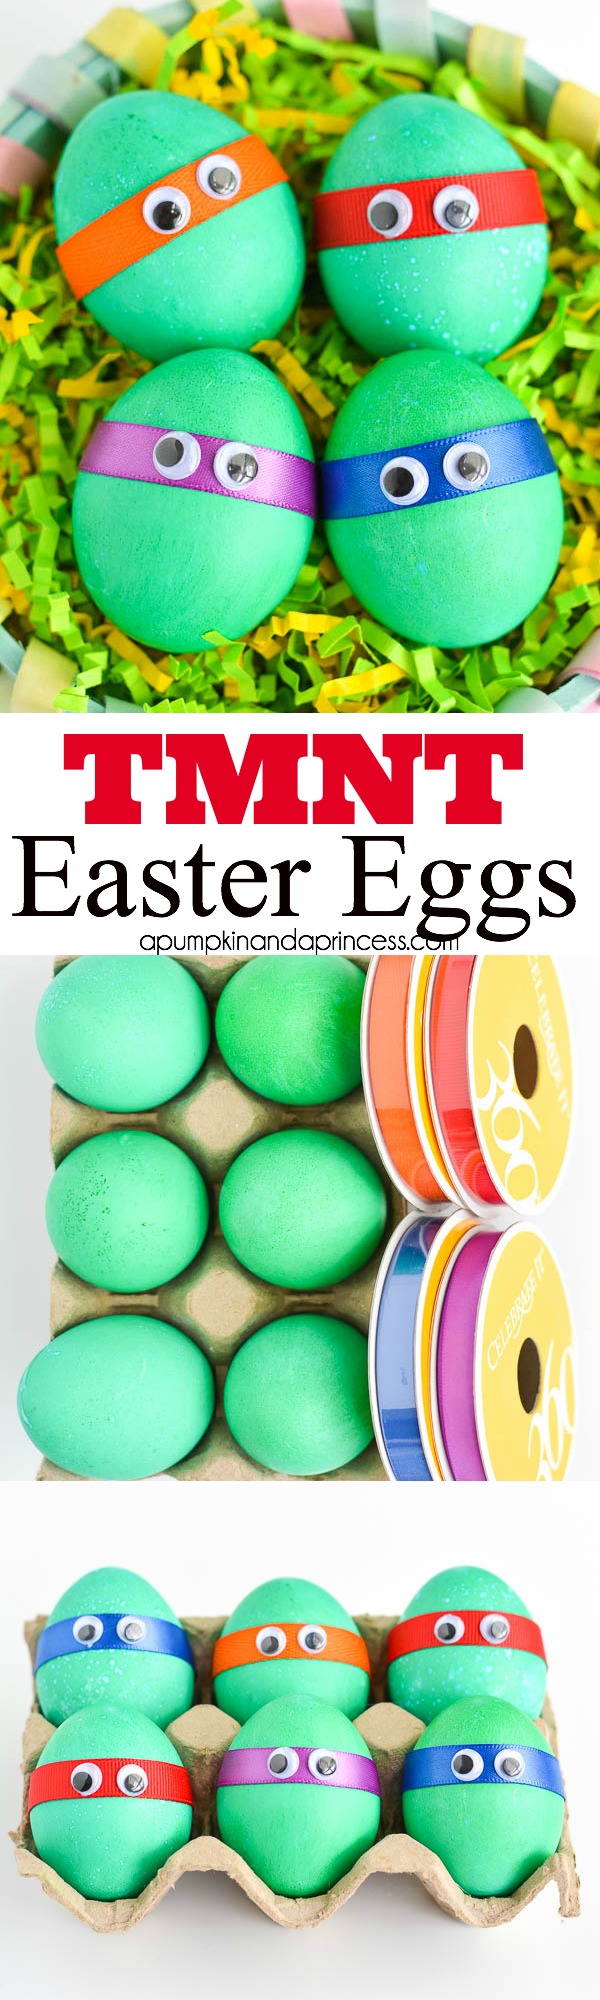 Dyed TMNT Easter Eggs